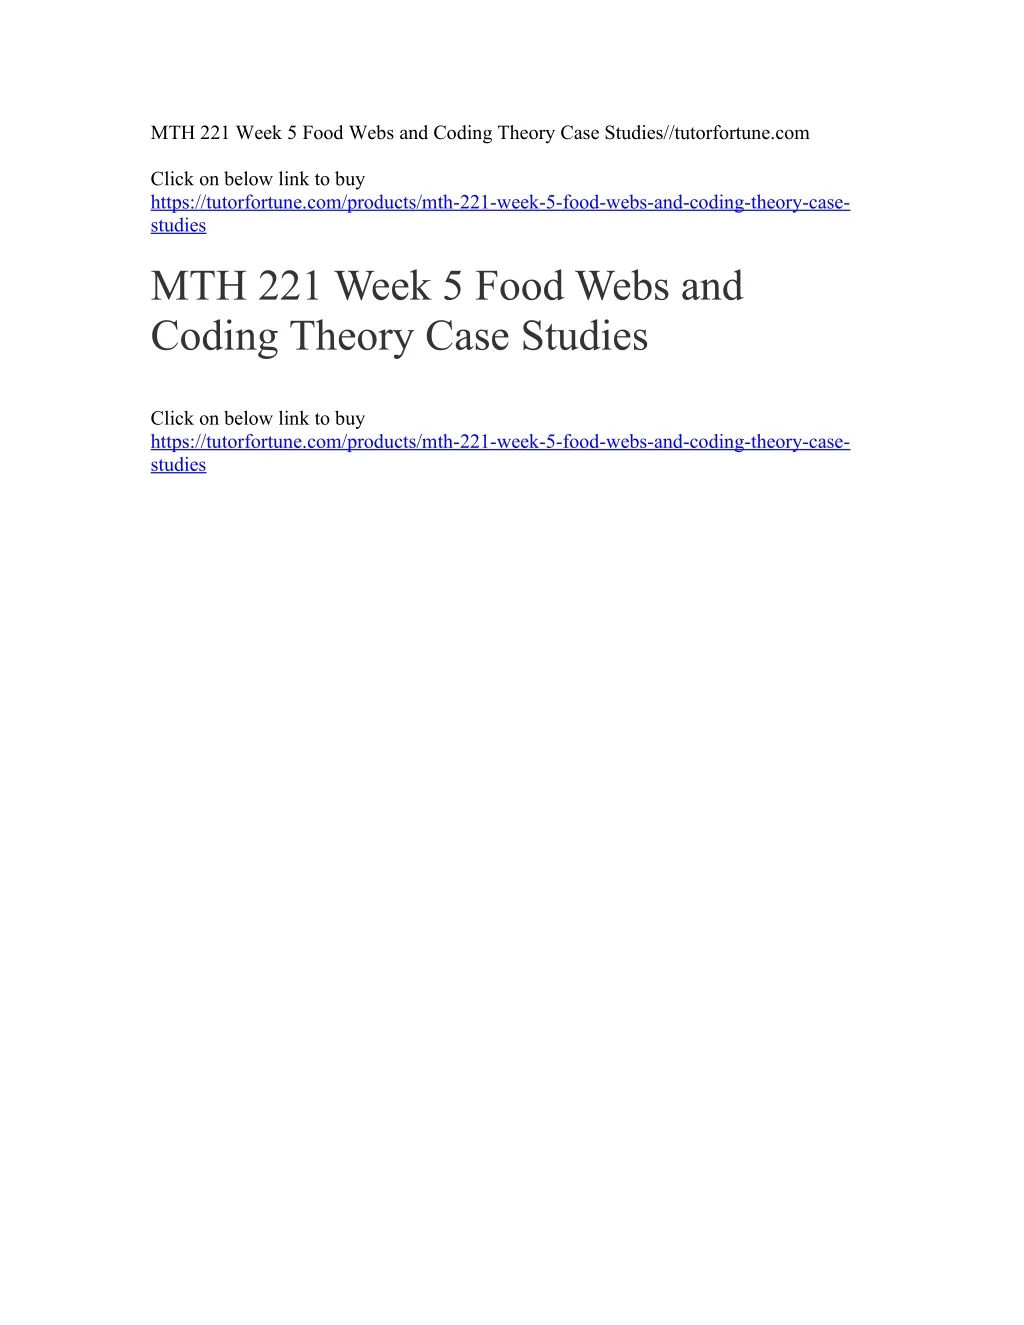 mth 221 week 5 food webs and coding theory case